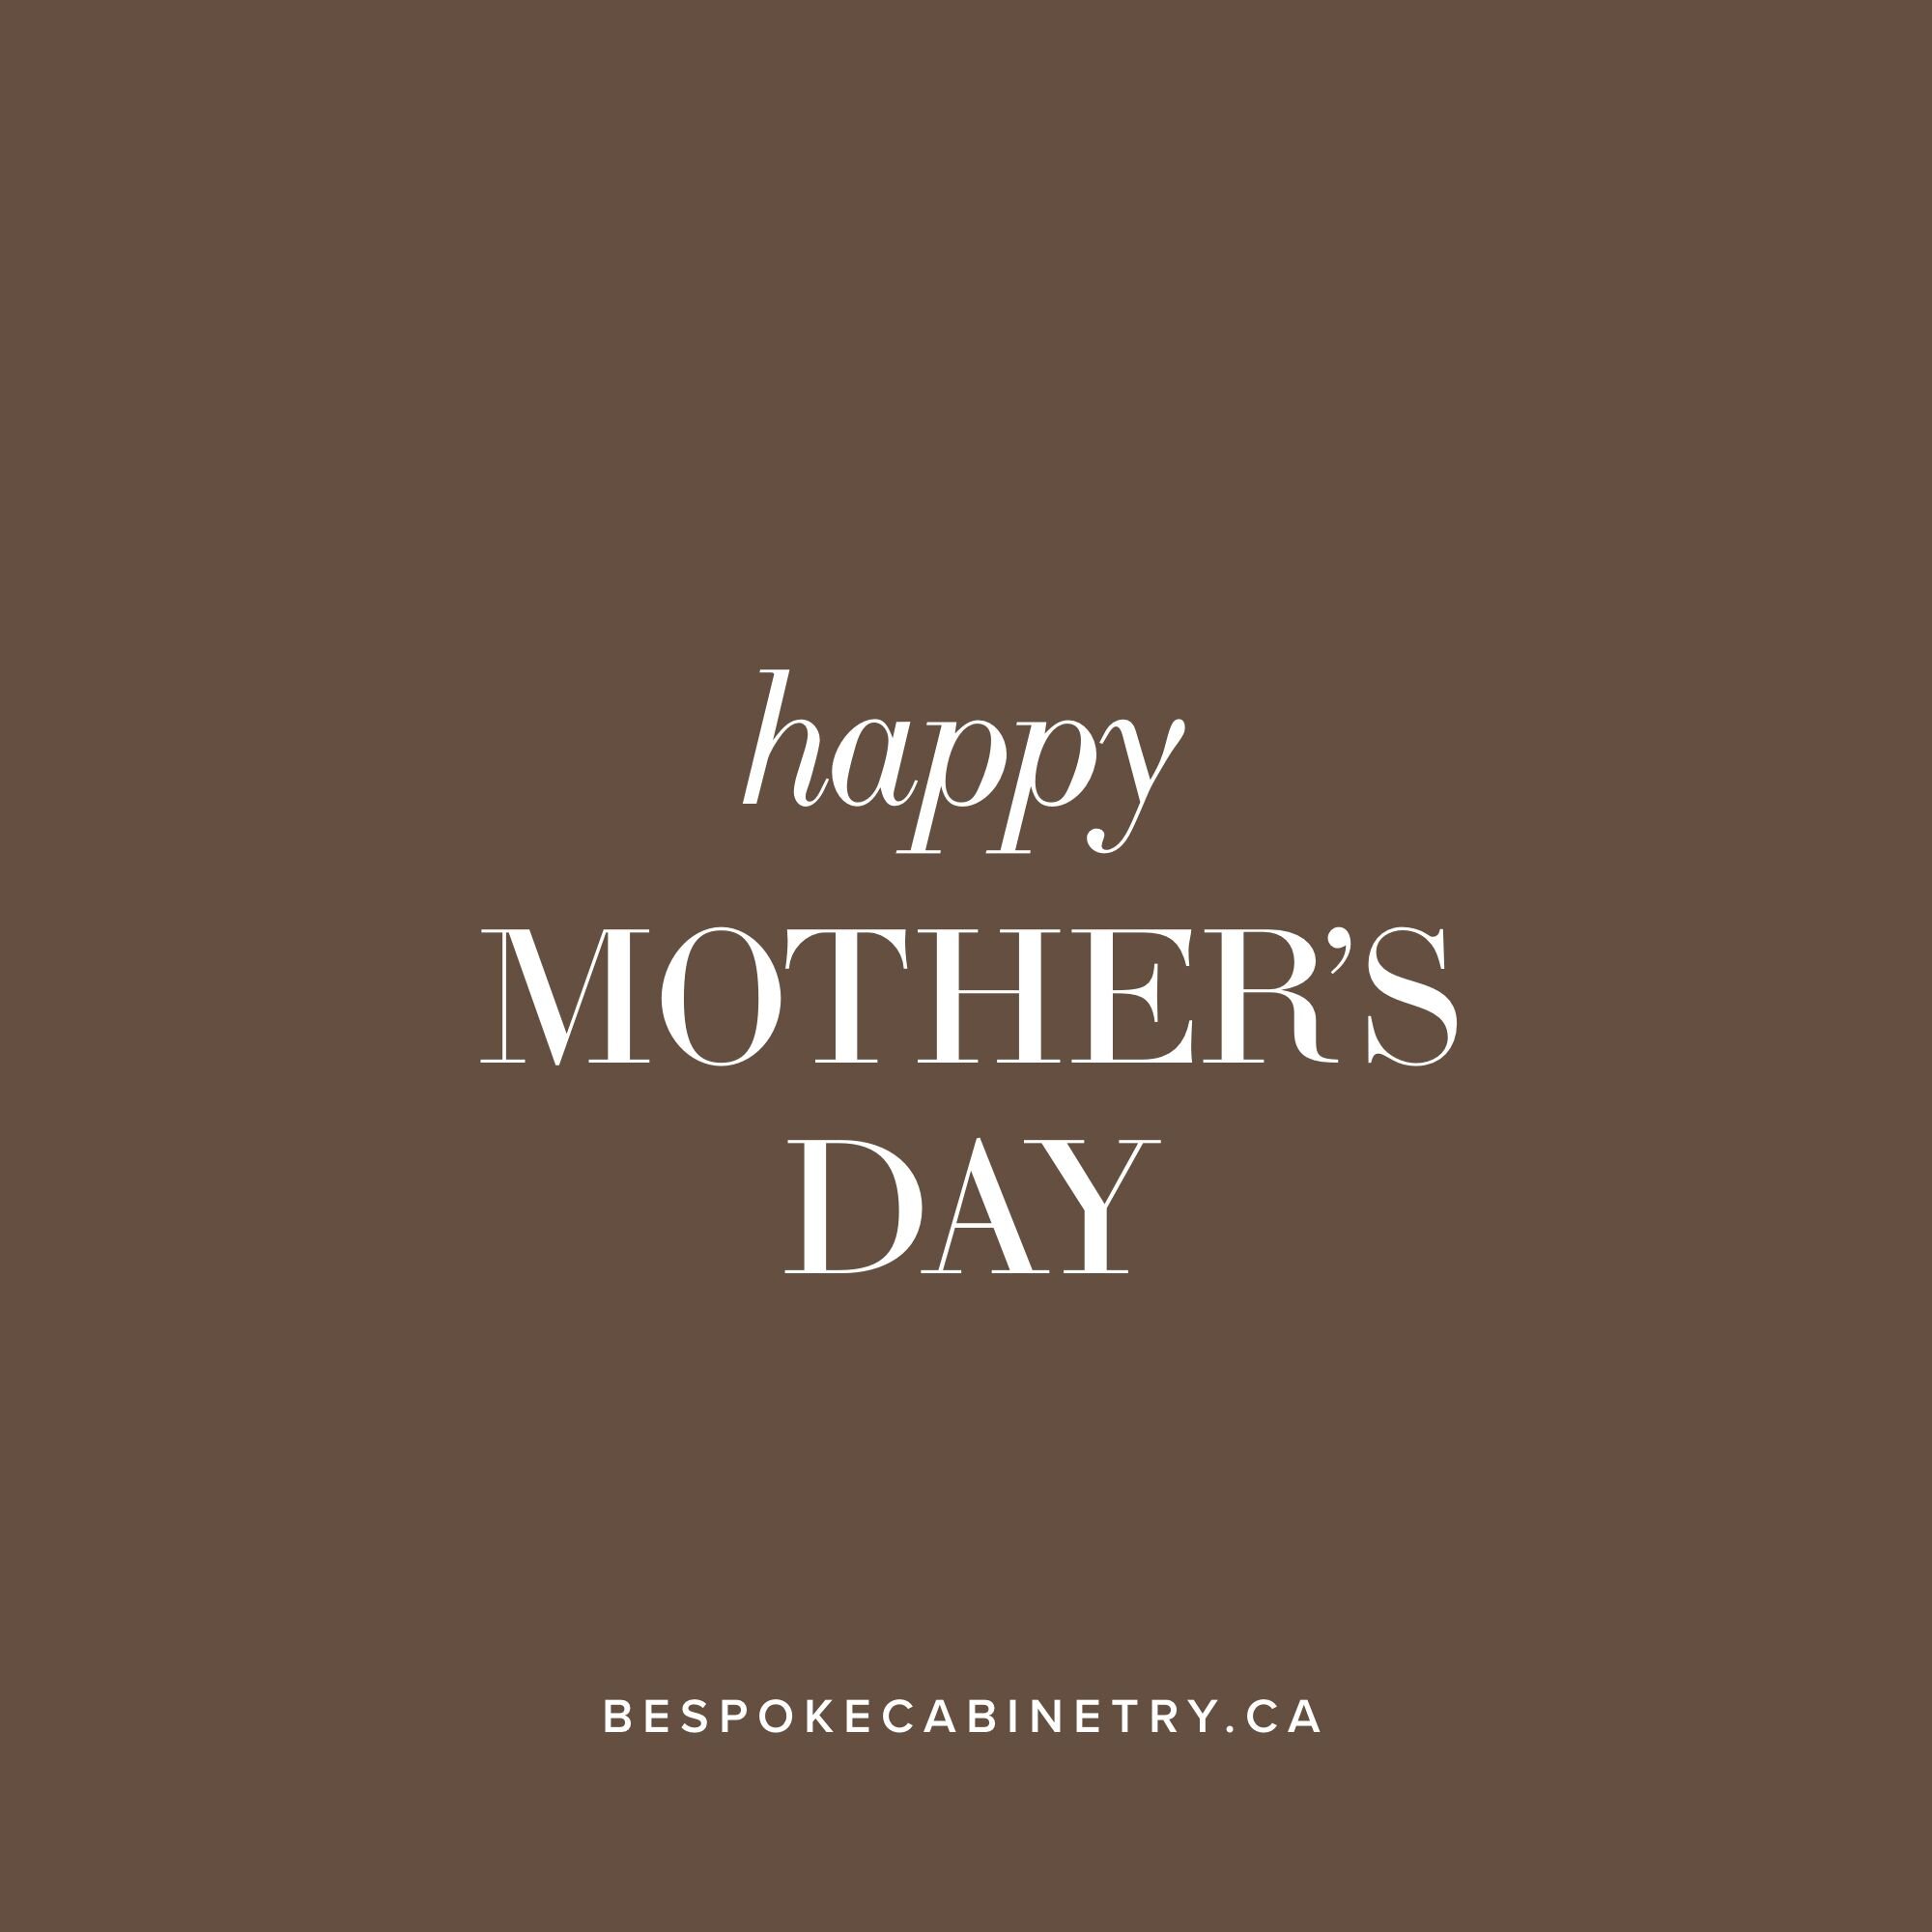 Ⓑ &mdash;MOTHER'S DAY 
To the incredible women who make every day brighter, thank you for your endless support and love. Wishing you a beautiful and joyful Mother's Day! 

-xo Team Bespoke
.
.
.
#mothersday #momlife #momlove #motherhood #happymothers